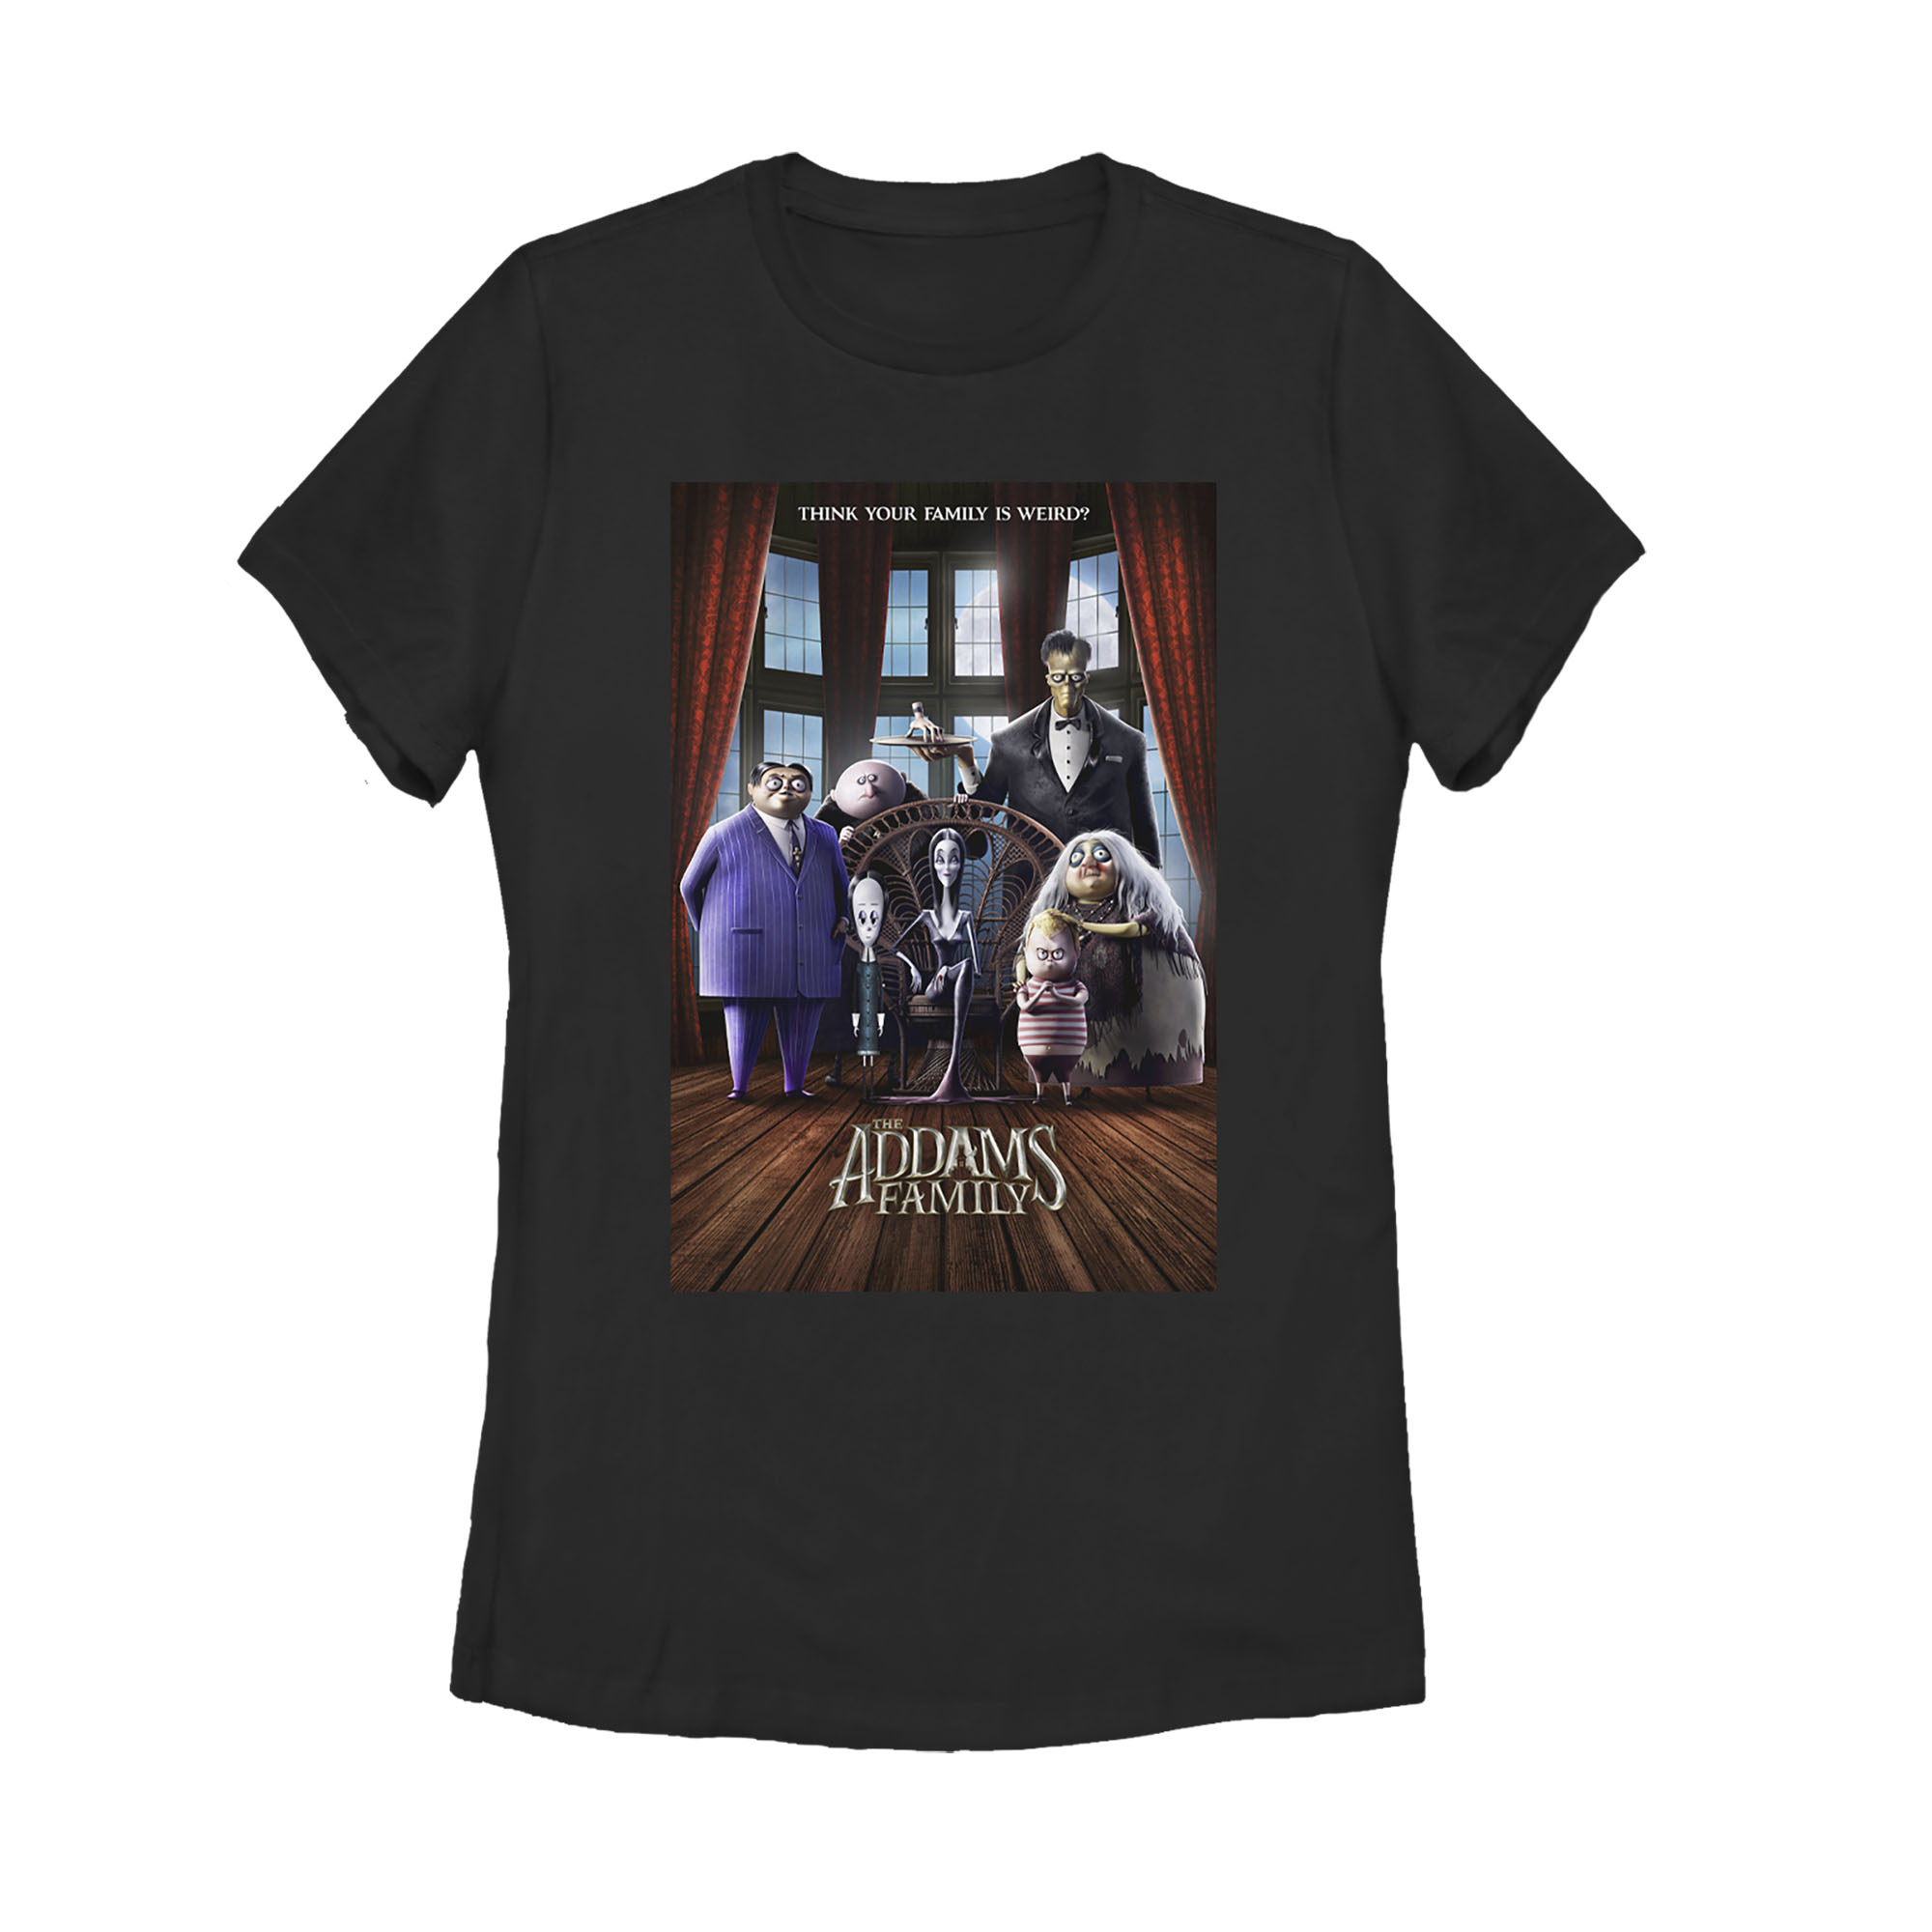 Women's Addams Family Theatrical Poster  Graphic Tee Black Large - image 1 of 3